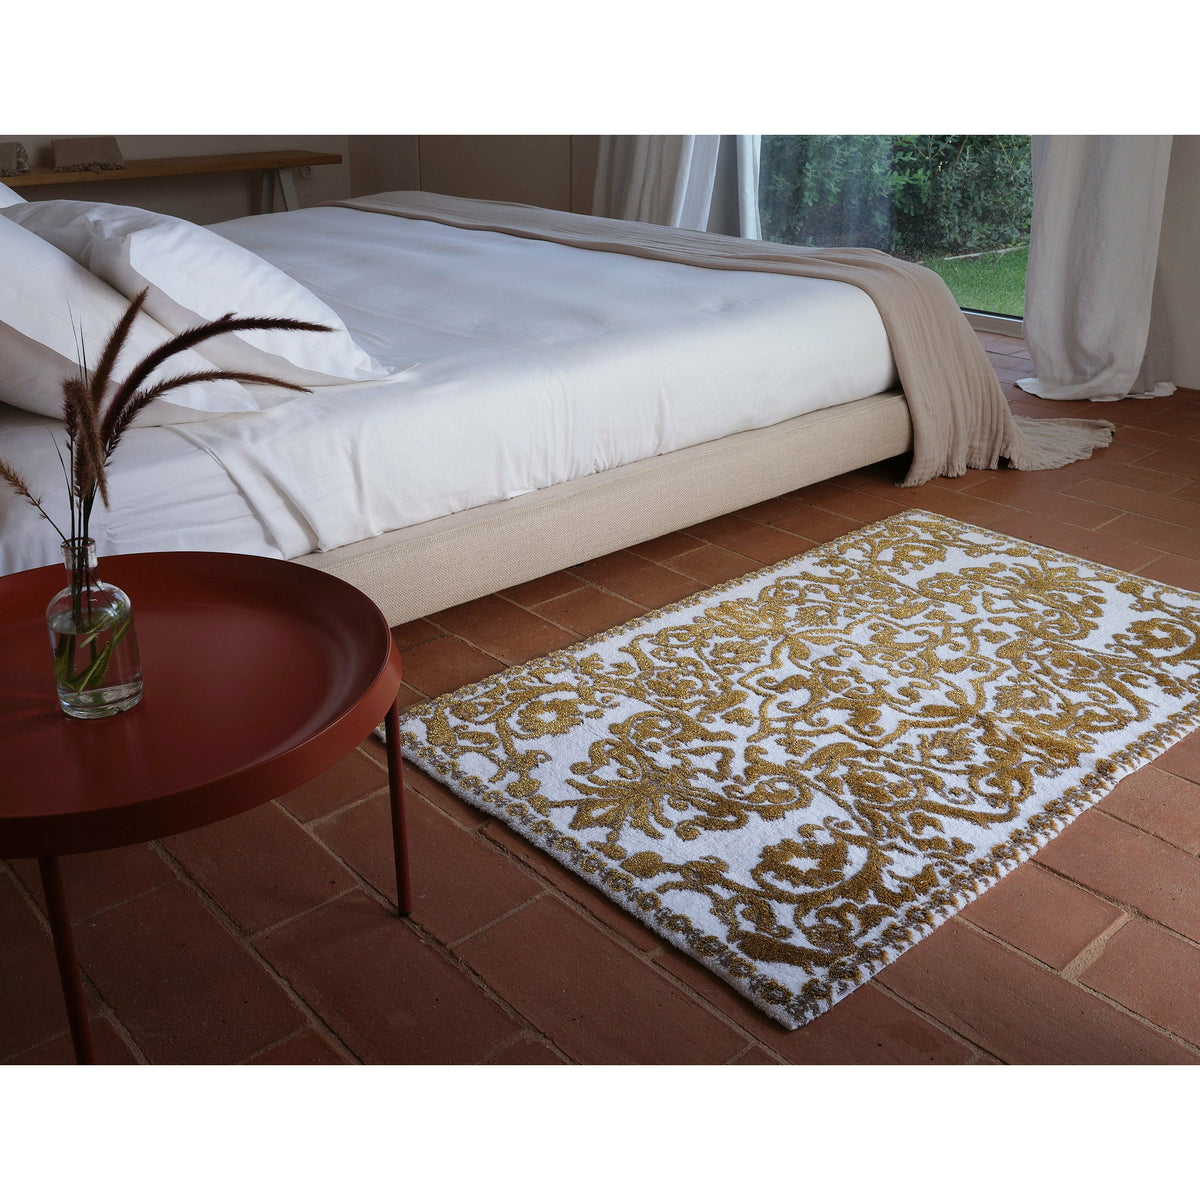 Abyss Habidecor Perse Bath Rugs Lifestyle Gold Fine Linens